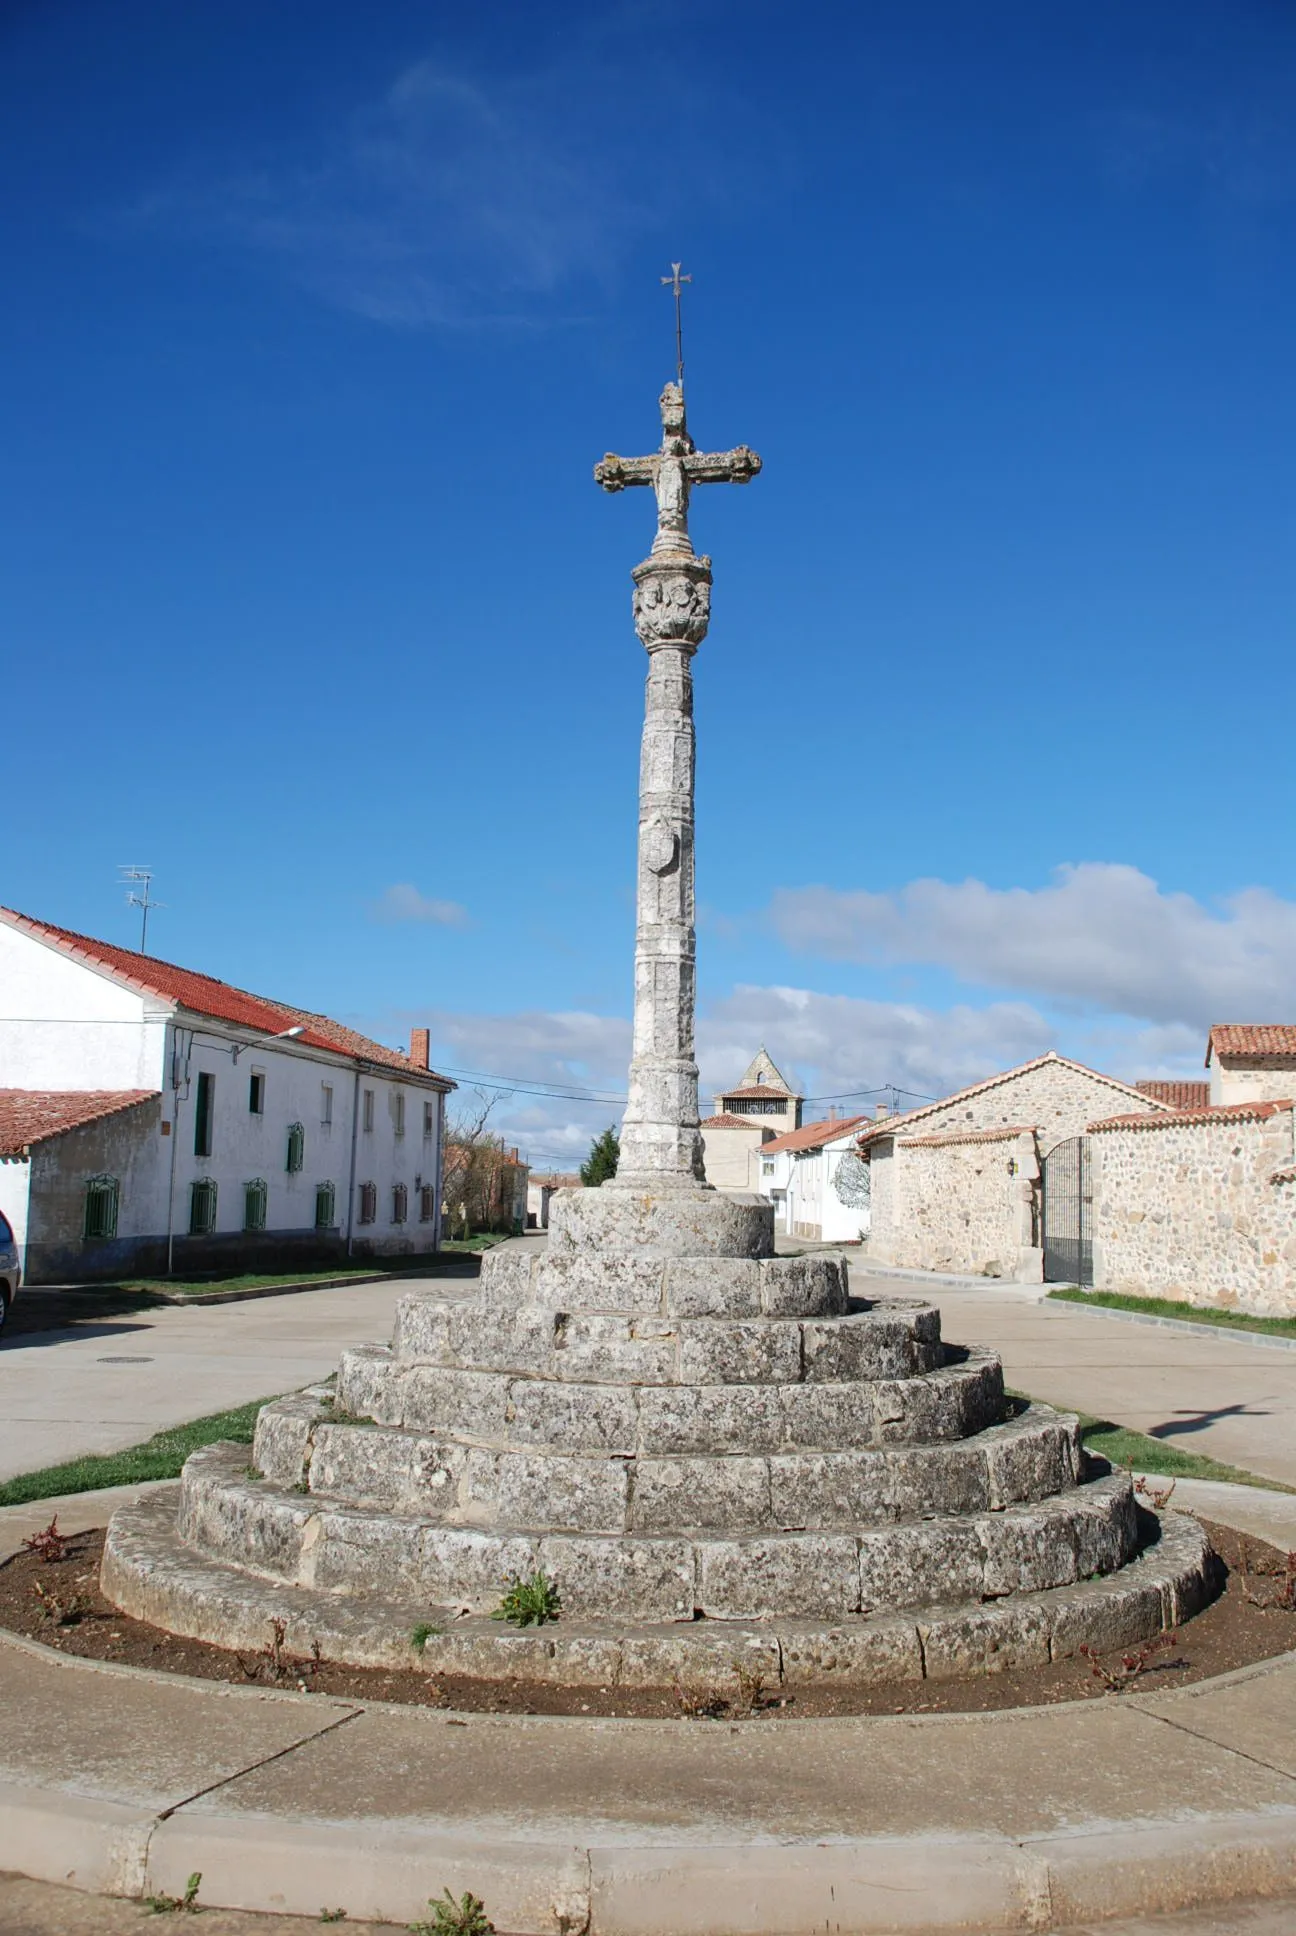 Photo showing: Municipal Cross in Traspeña de la Peña (Palencia, Castile and León). One of the most beautiful of all Castile. Is located on a pedestal of seven steps circular and decreasing, raising a mast embellished with multiple Gothic, drawings to finish with a thick capital where carved various figures of Saints. At its peak, the cross is the Virgin on the one hand, and the crucified on the other. This religious sign, recently restored, thrilled by its beauty and the grandeur of the place is located. It is funded work. Such a Portillo carved it in the 15th century.